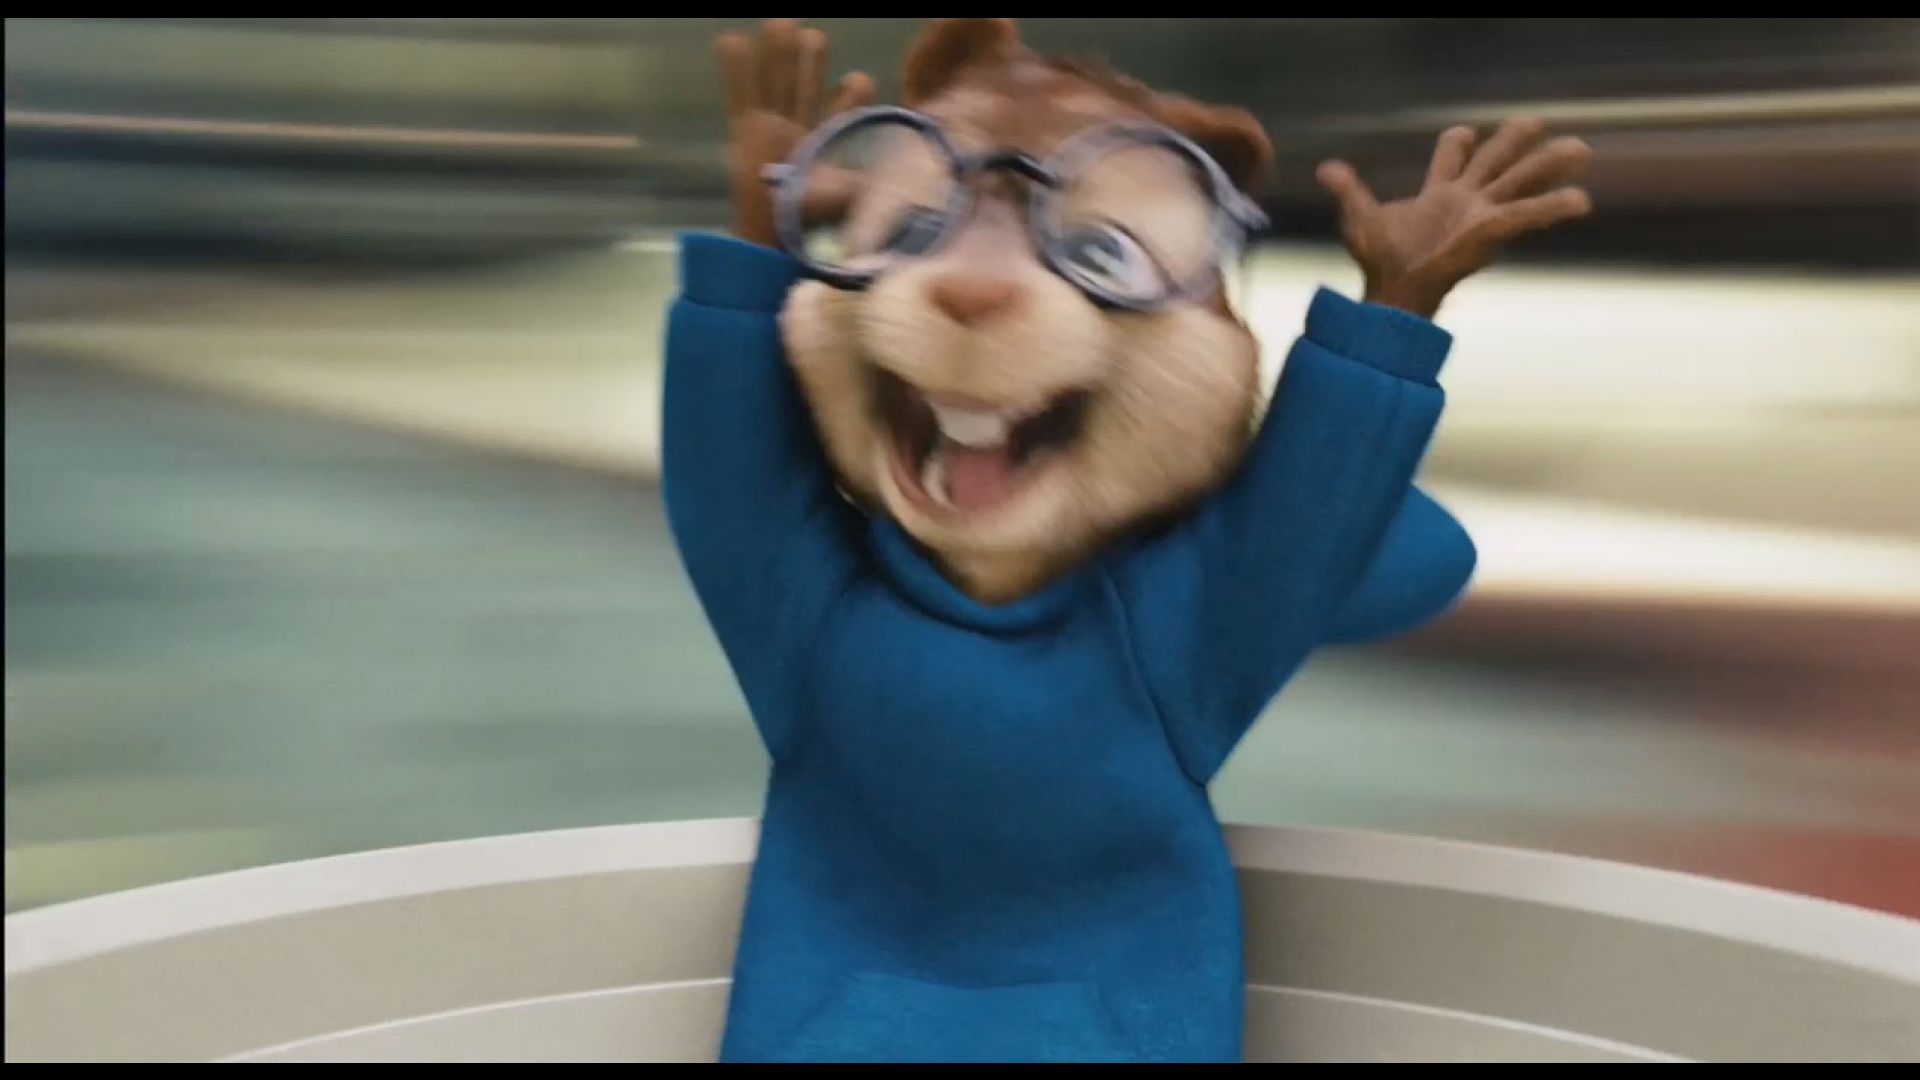 alvin and the chipmunks the squeakquel trailer